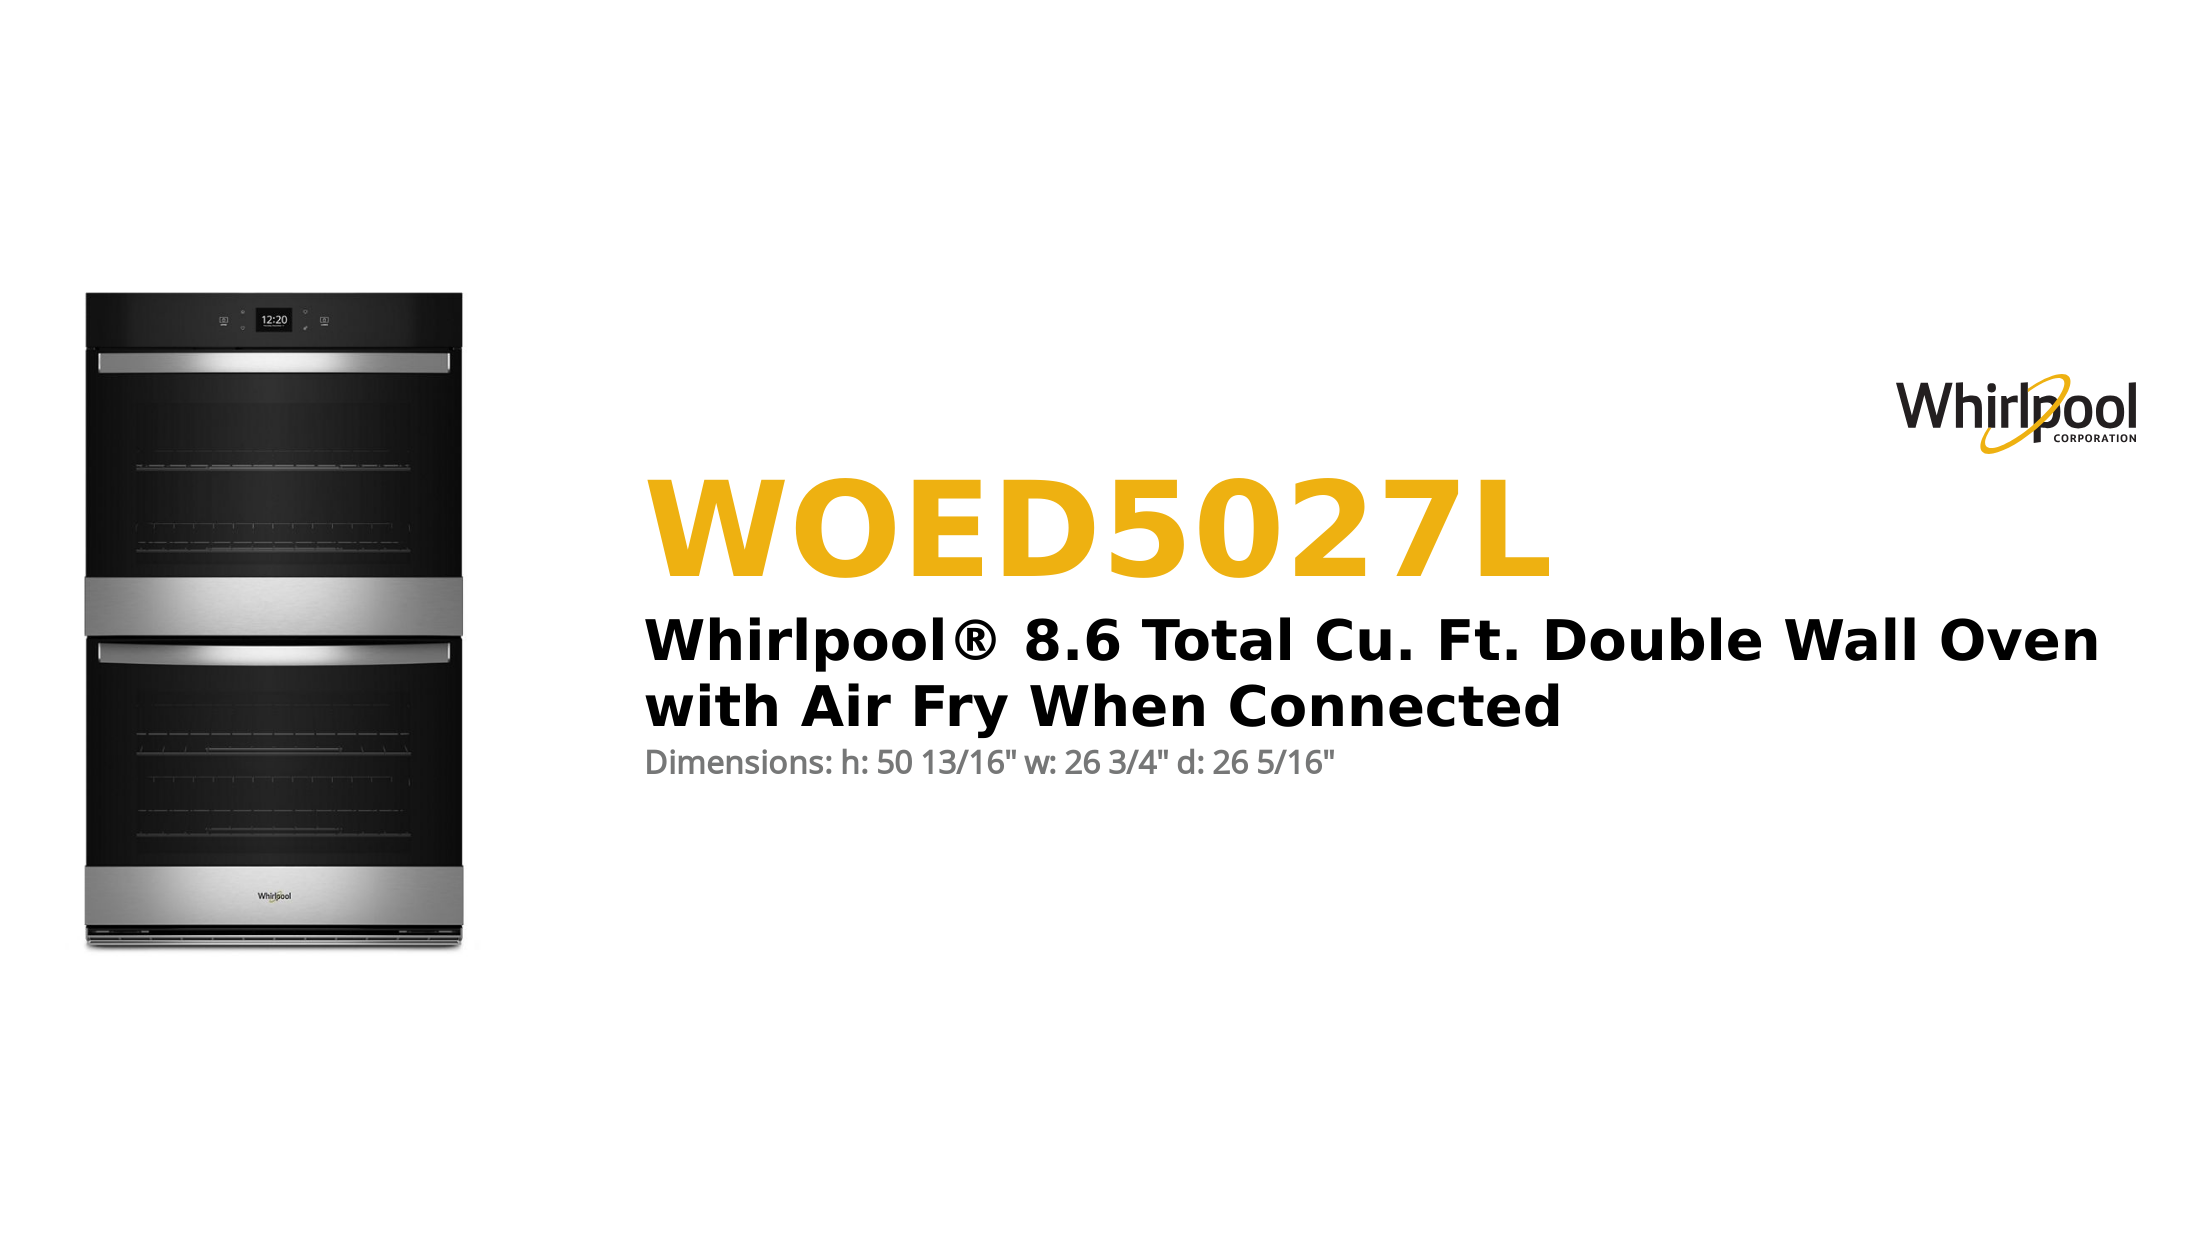 



WHIRLPOOL® 8.6 TOTAL CU. FT. DOUBLE WALL OVEN WITH AIR FRY WHEN CONNECTED



